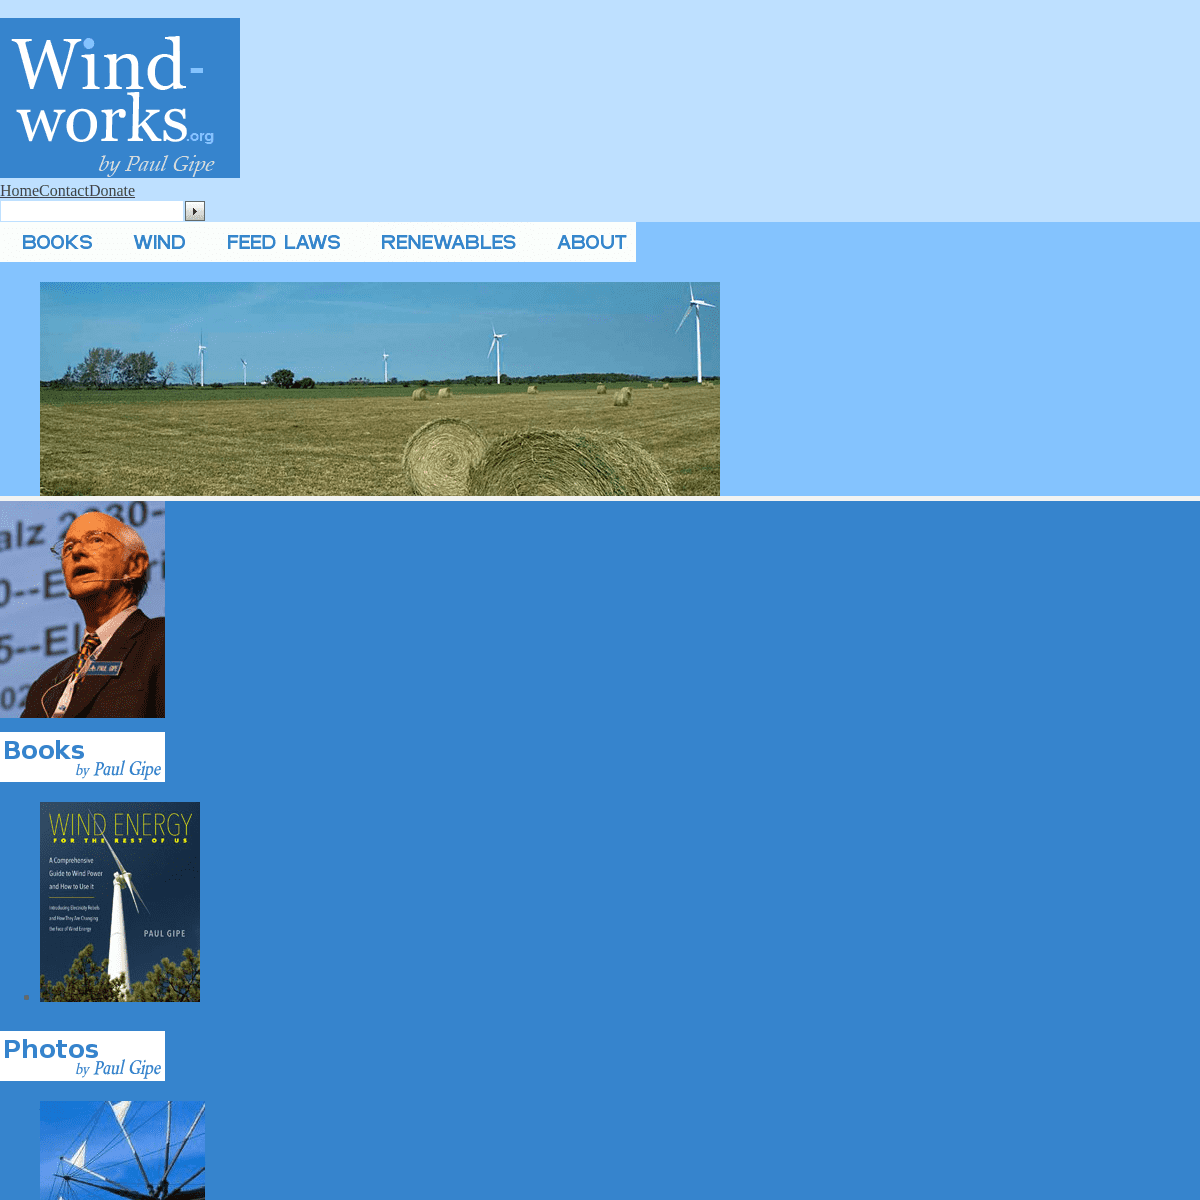 A complete backup of https://wind-works.org